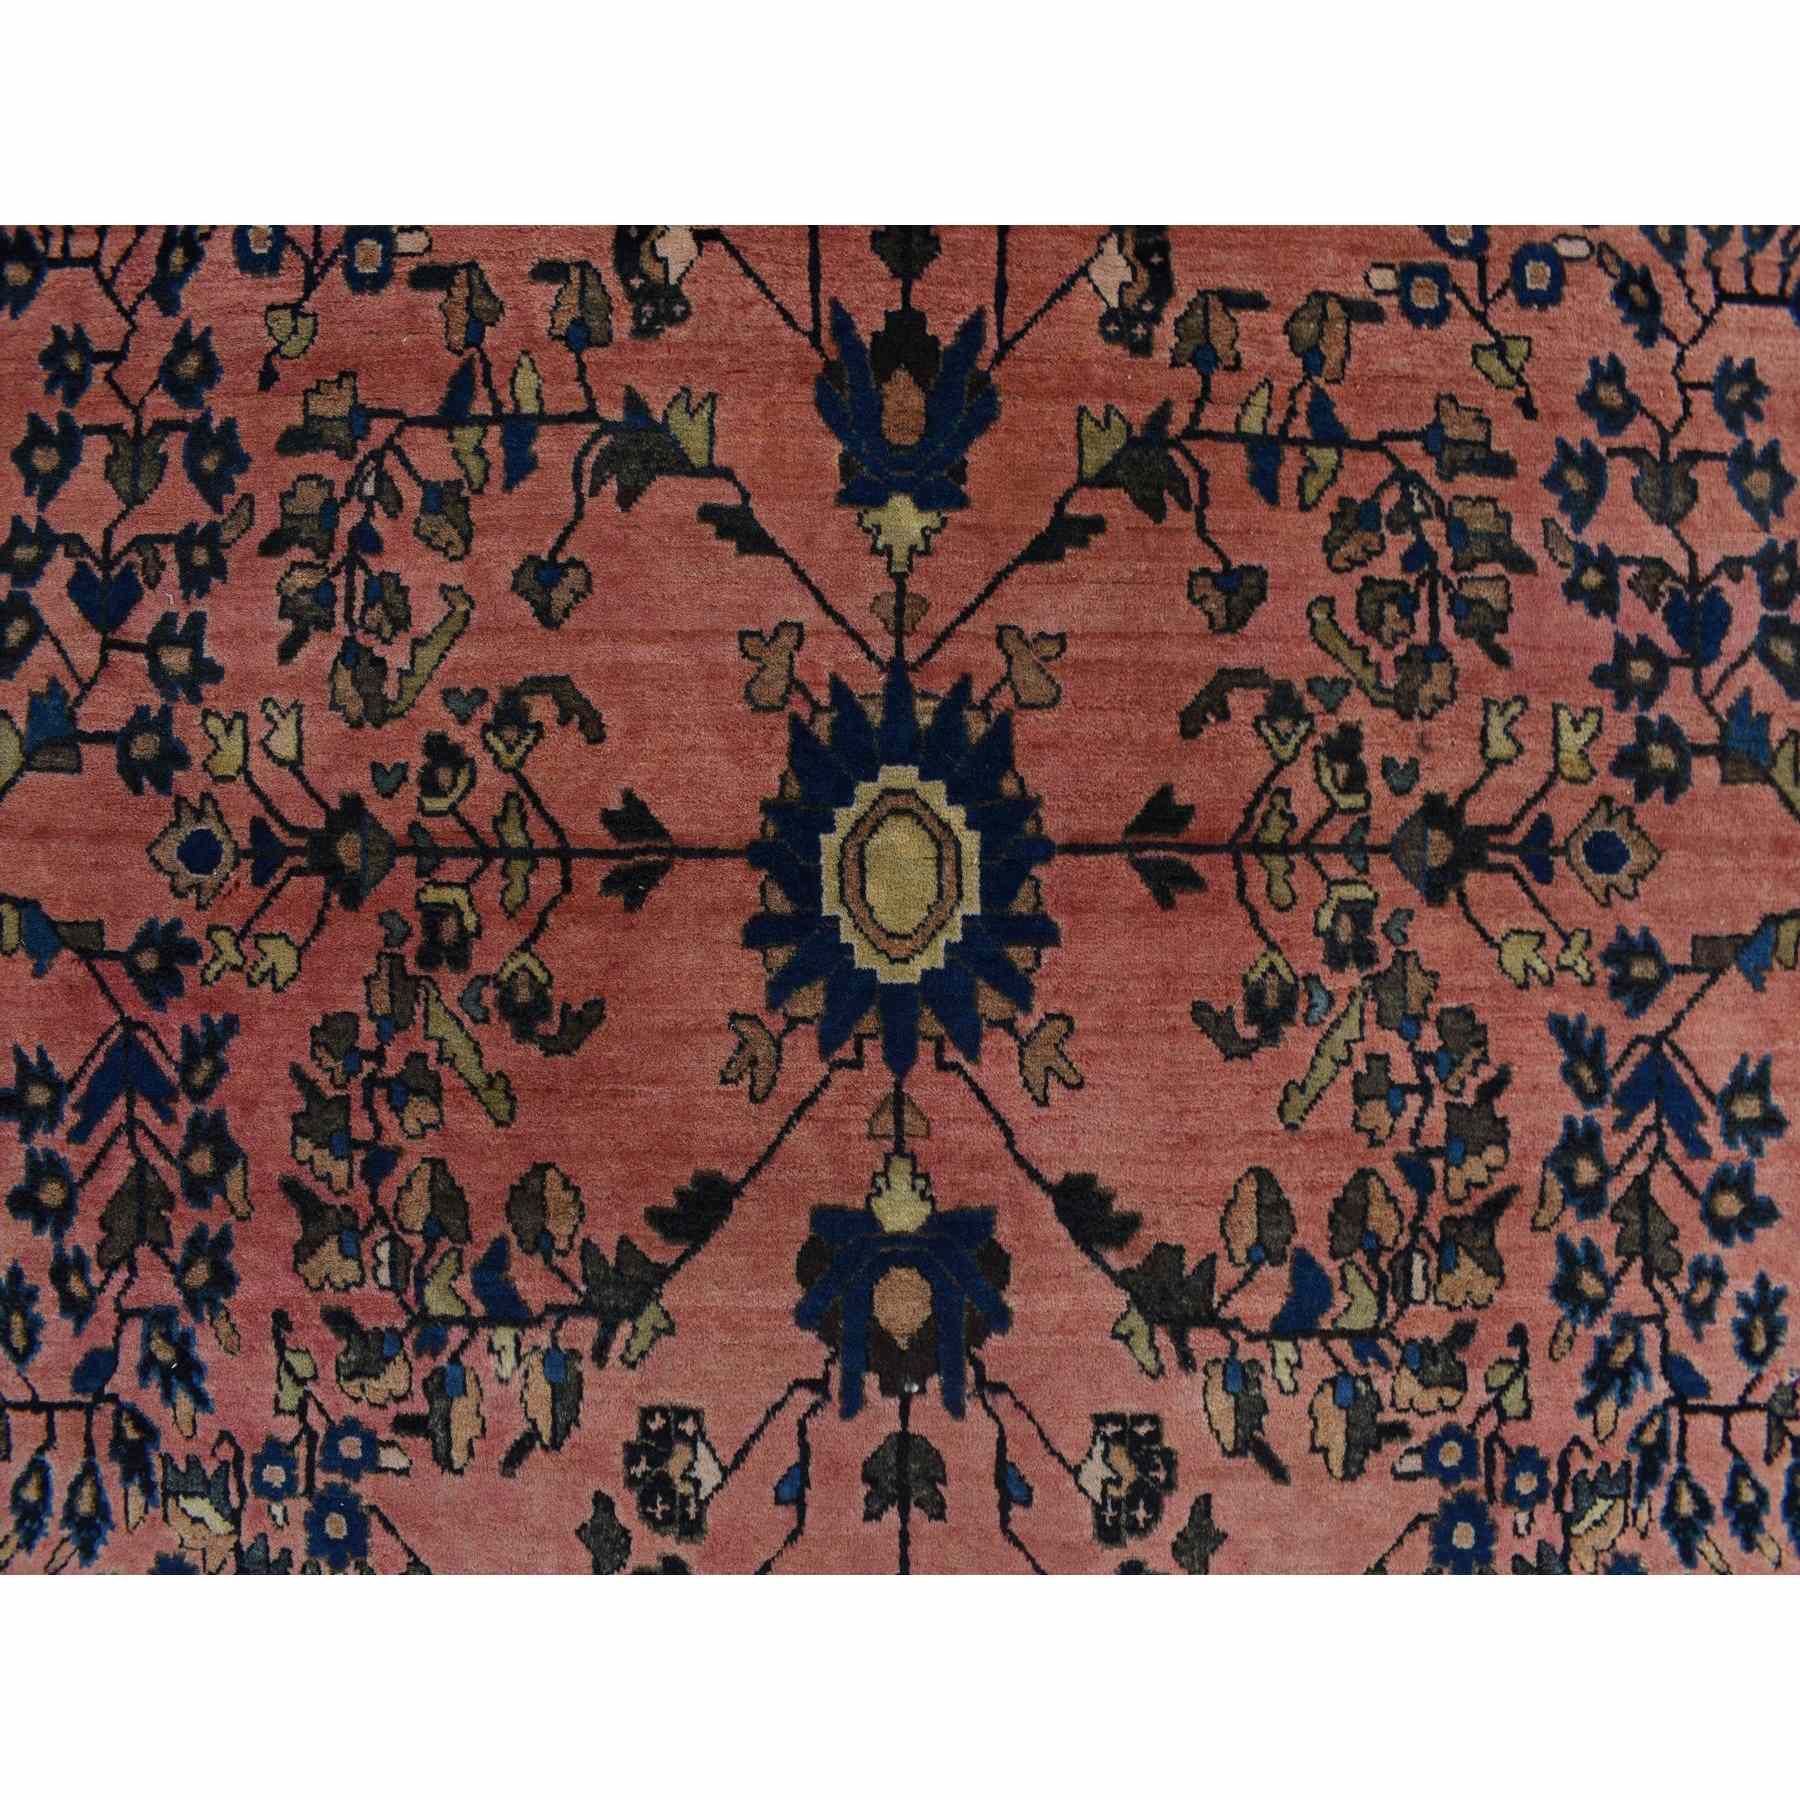 Antique-Hand-Knotted-Rug-391005